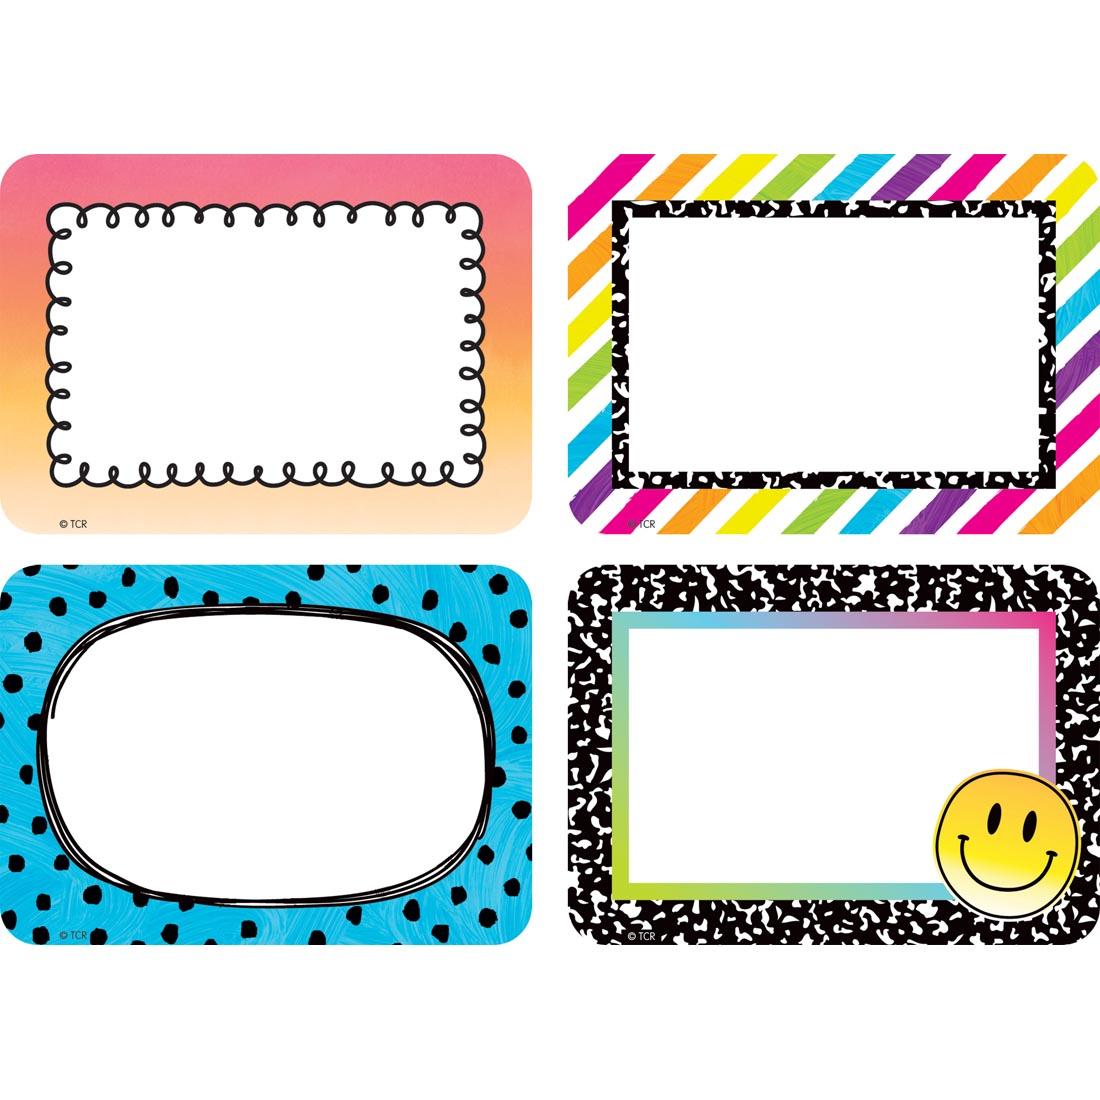 Four Name Tags/Labels from the Brights 4Ever collection by Teacher Created Resources